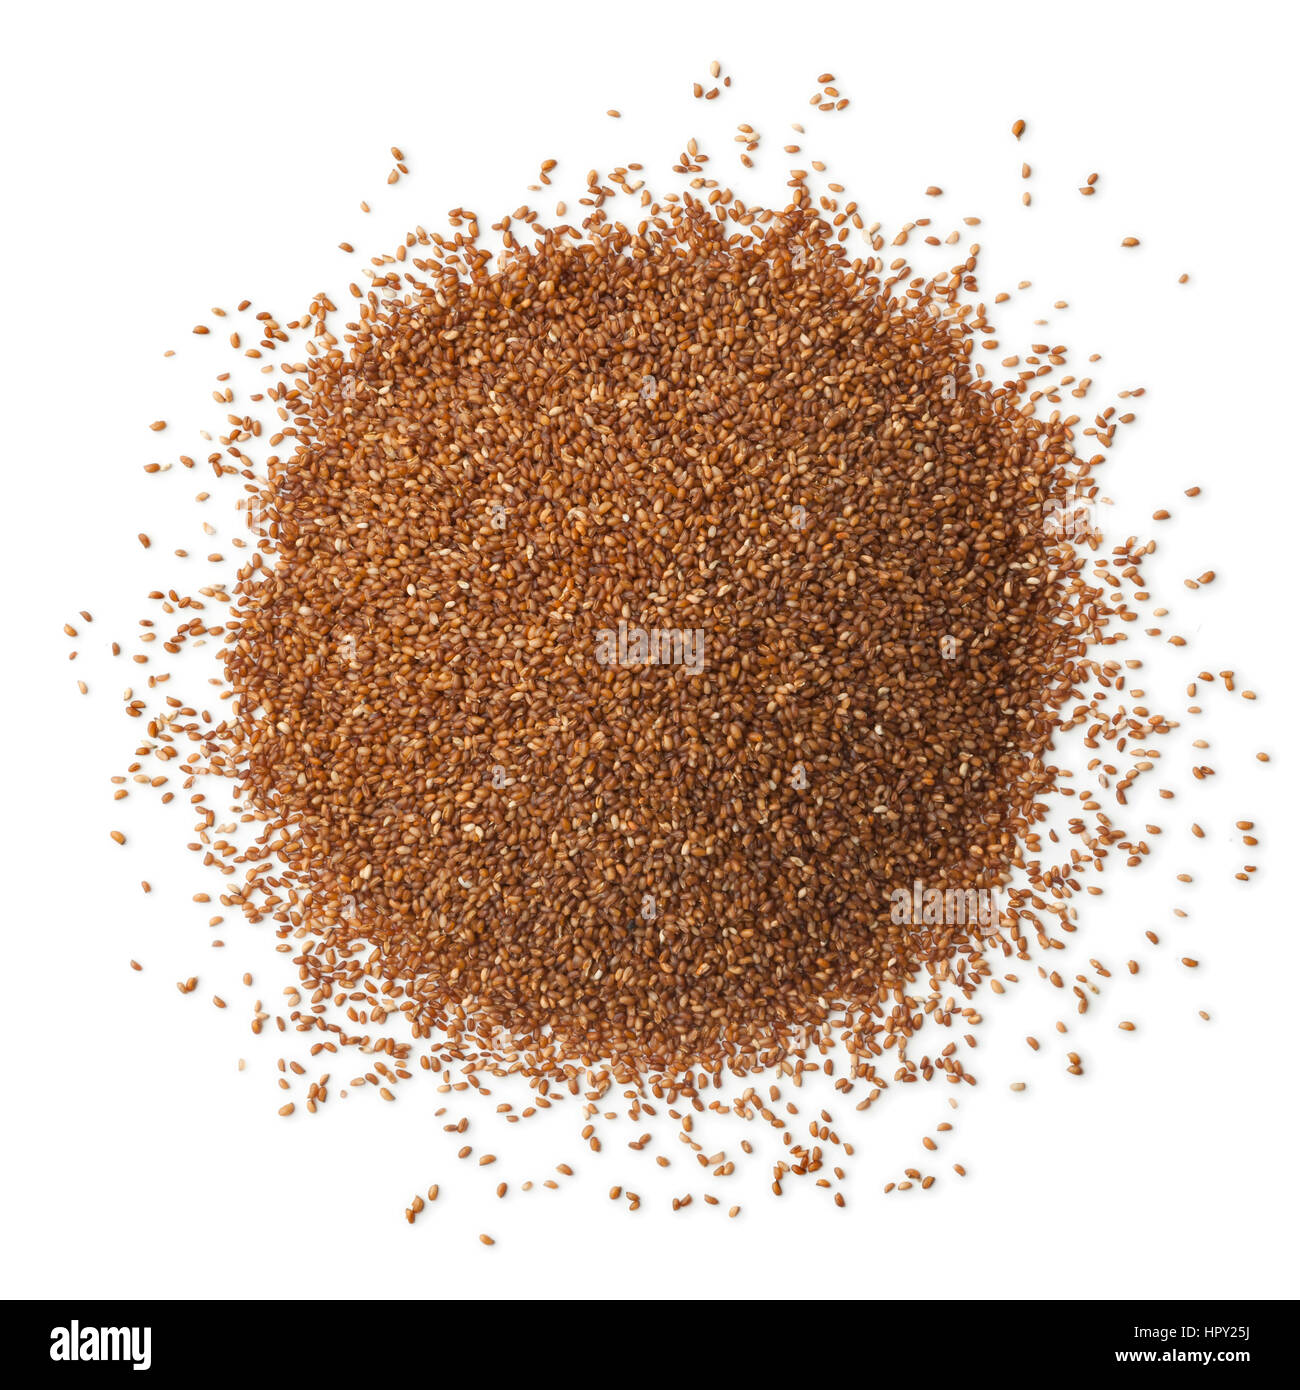 Heap of teff seeds on white background Stock Photo